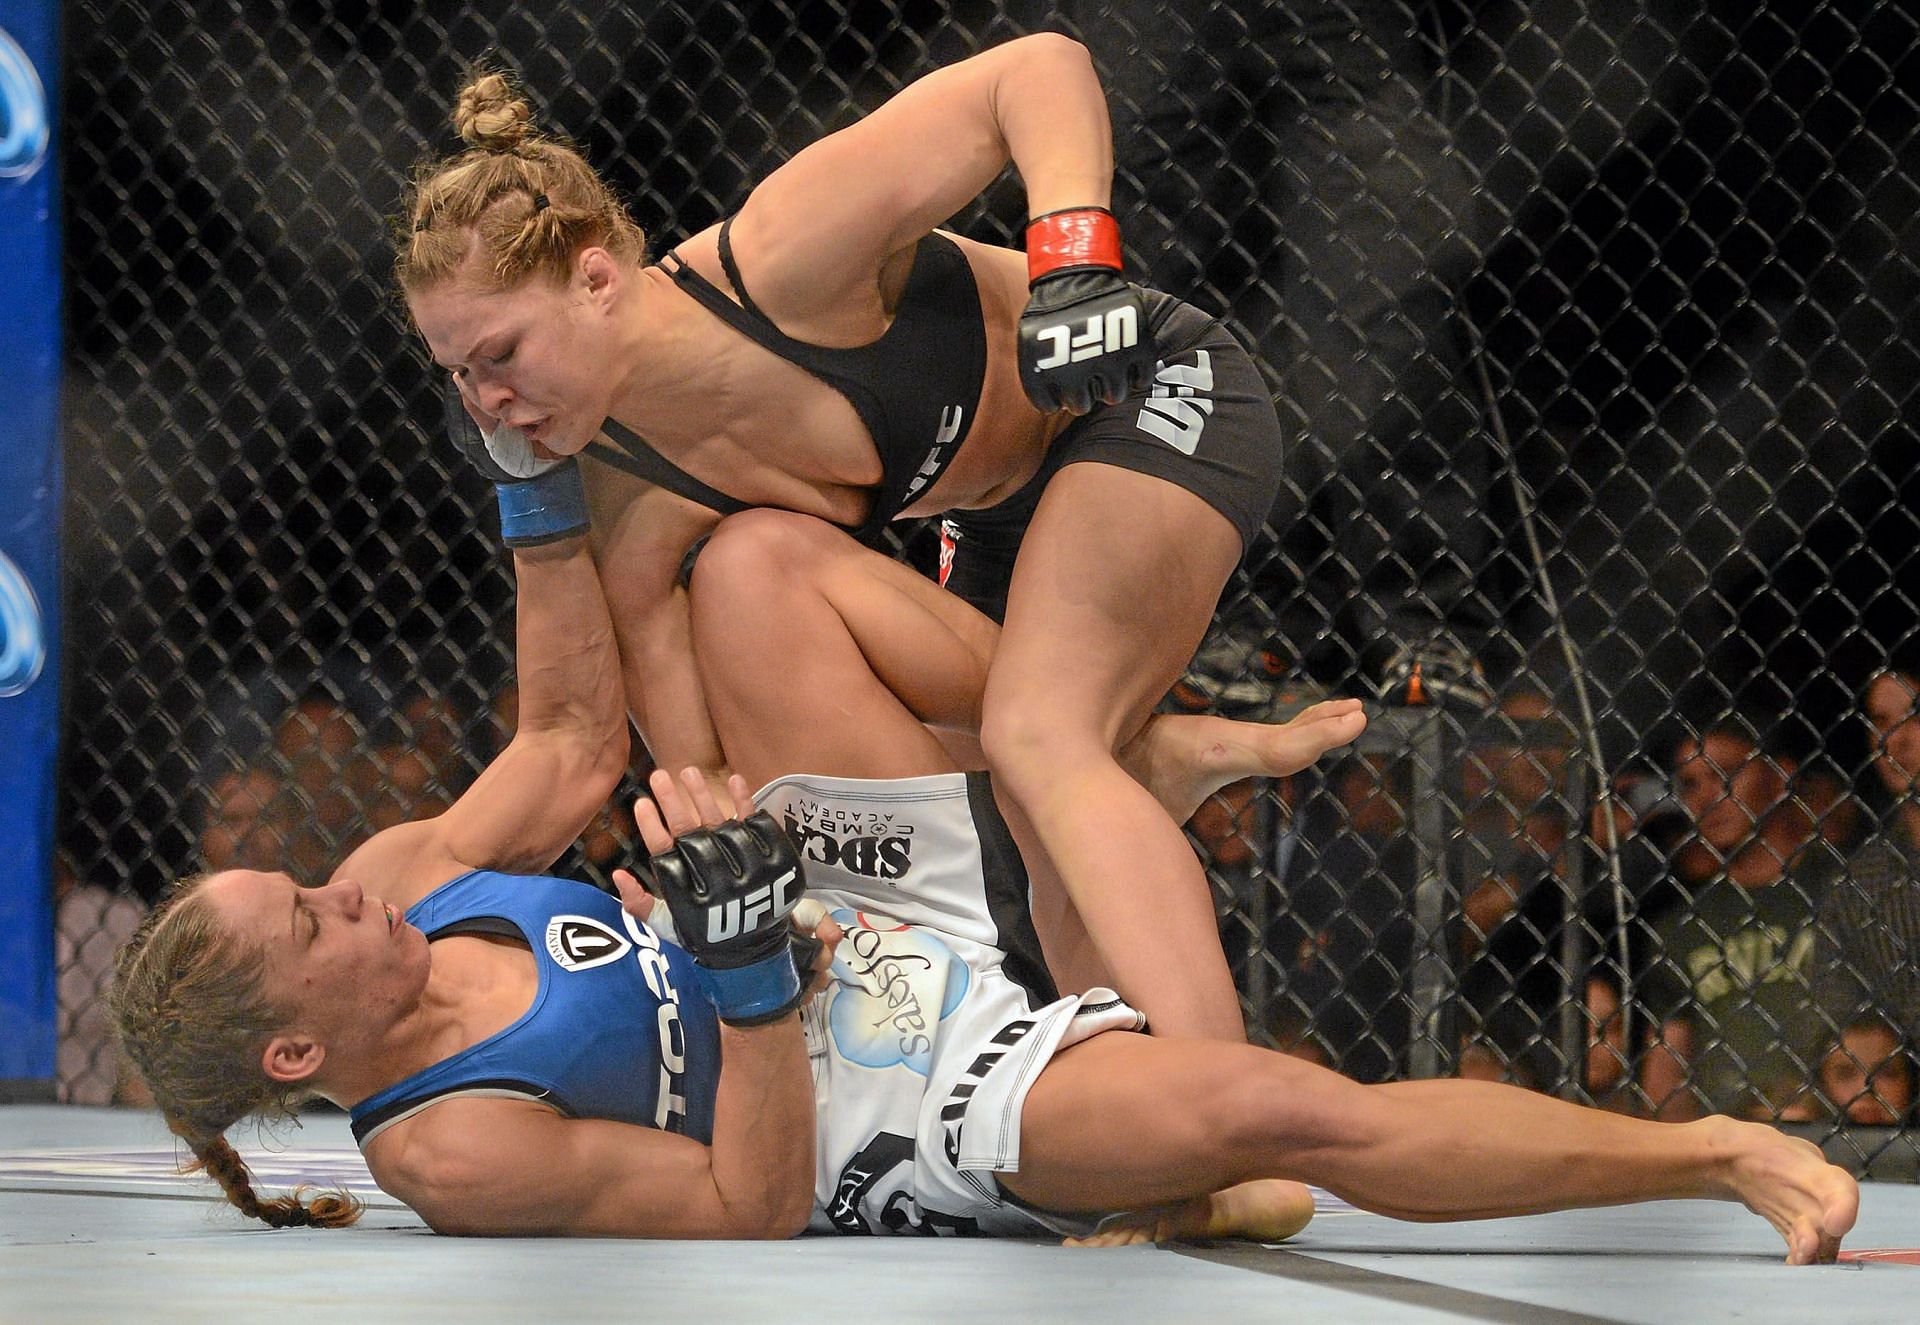 Ronda Rousey had to fight out of some bad positions to take out Liz Carmouche in a stone cold classic at UFC 157